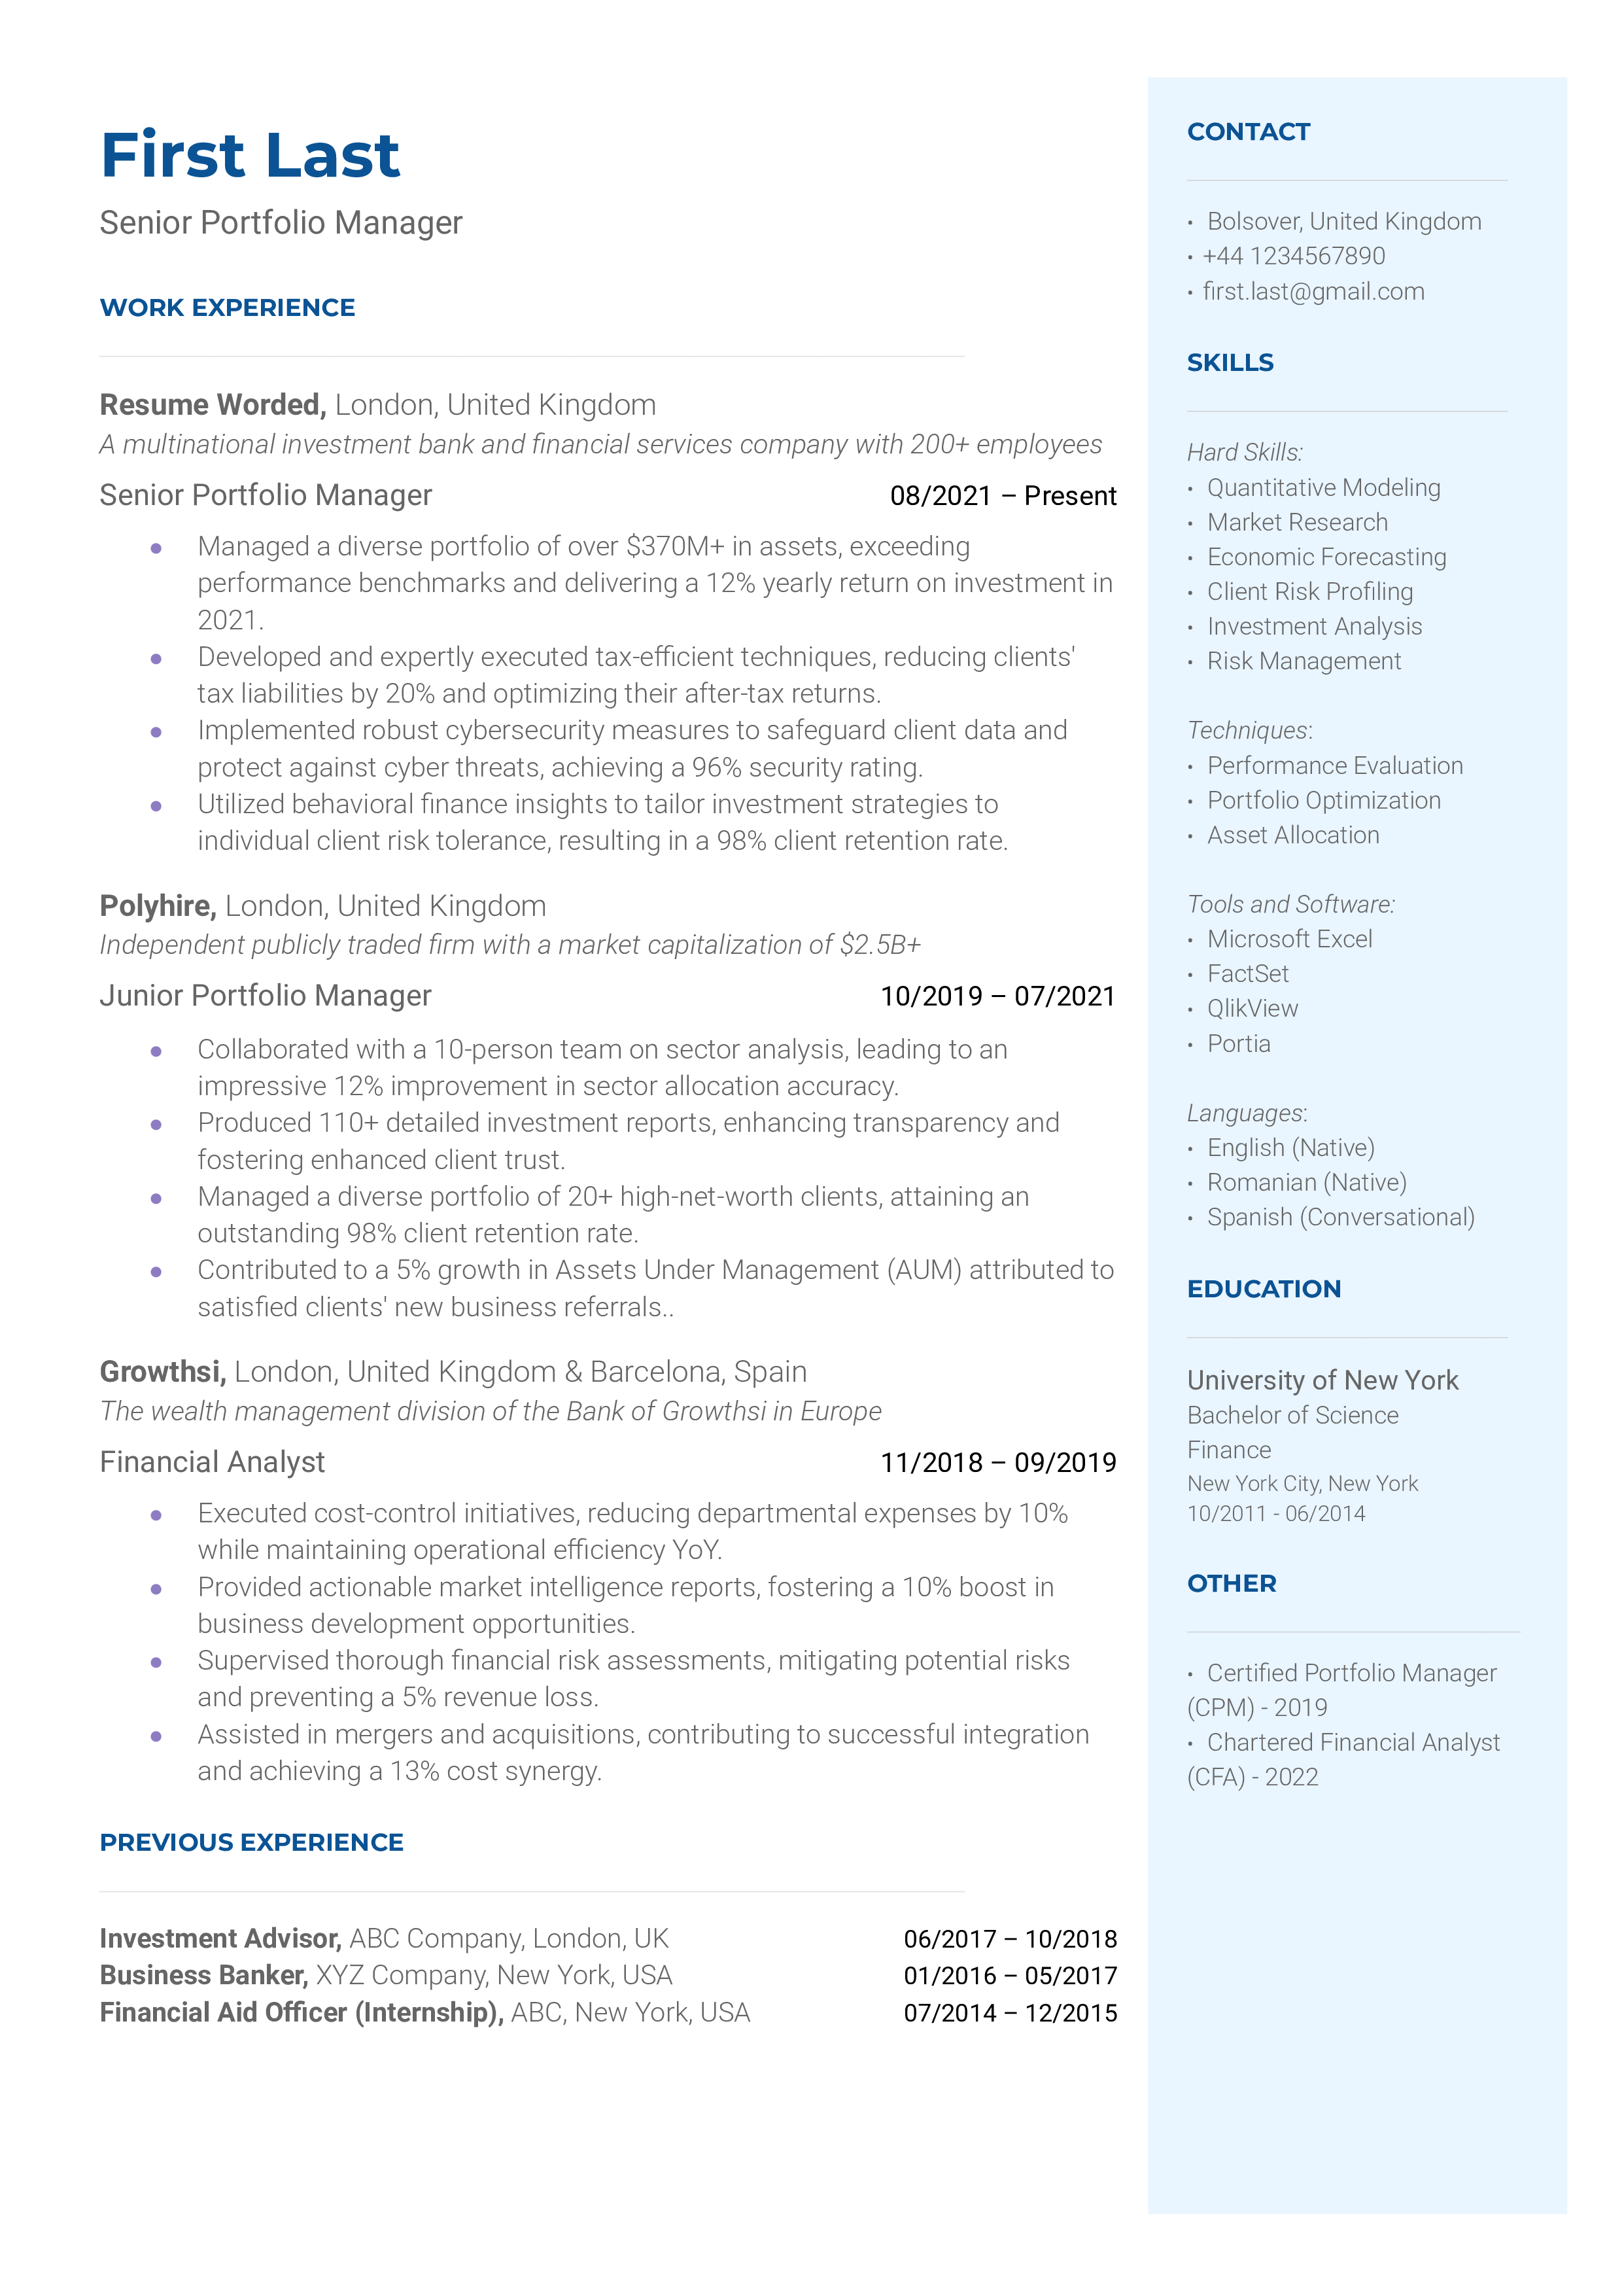 A resume for a Senior Portfolio Manager demonstrating strategic insights and leadership capabilities.